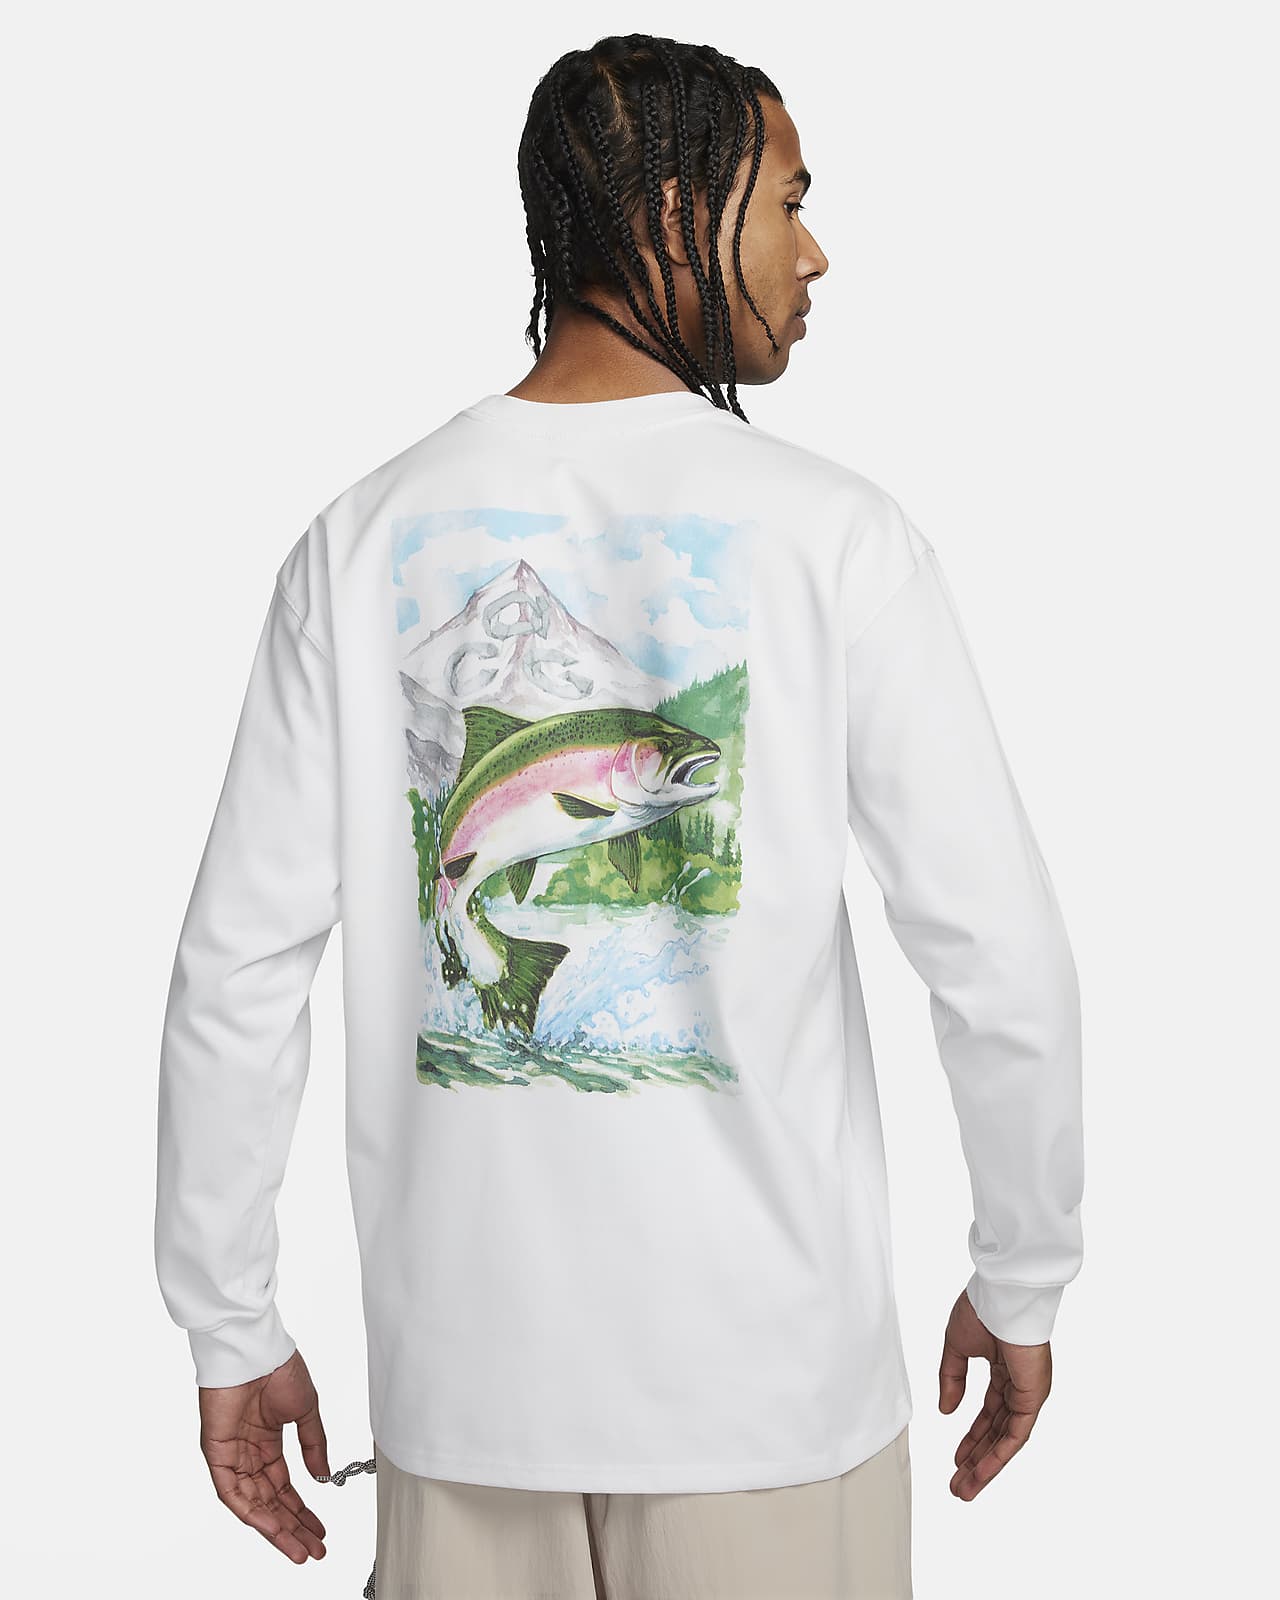 Fish Hippie - The most comfortable t-shirt you will ever wear